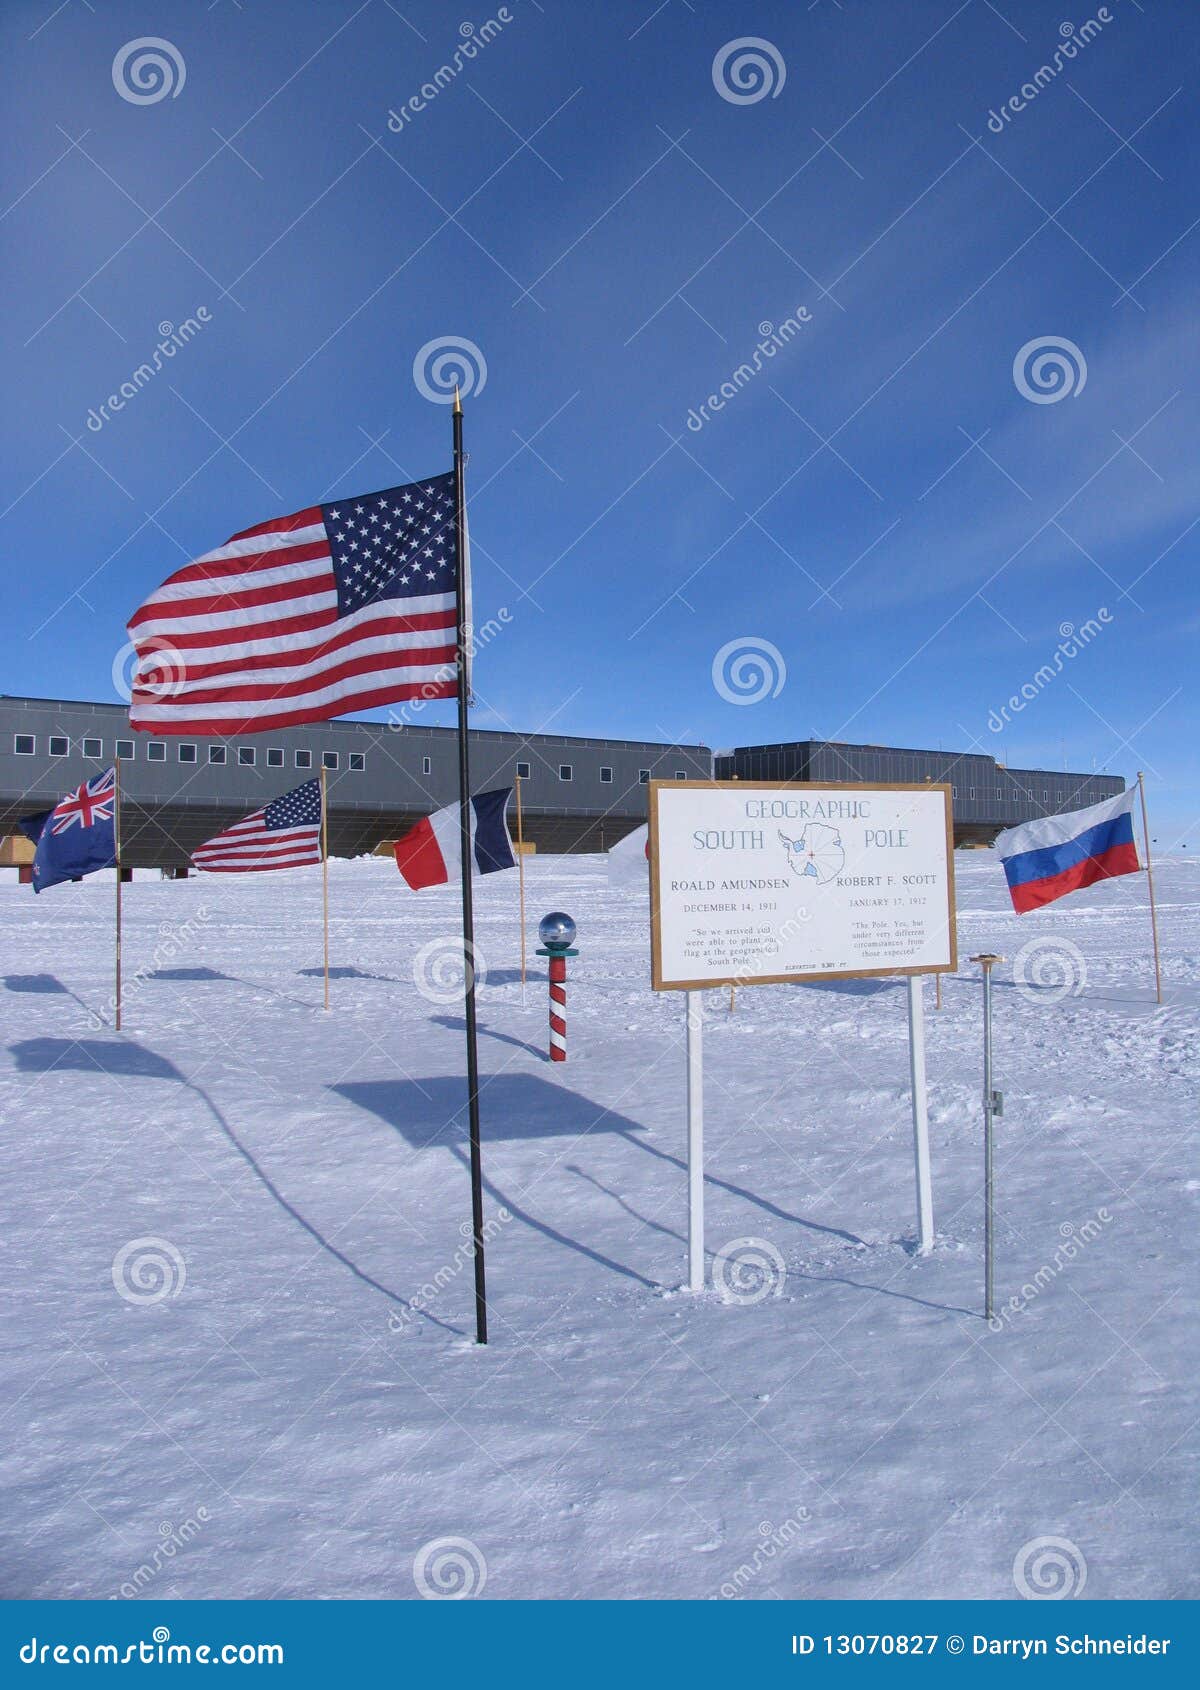 geographic and ceremonial south pole